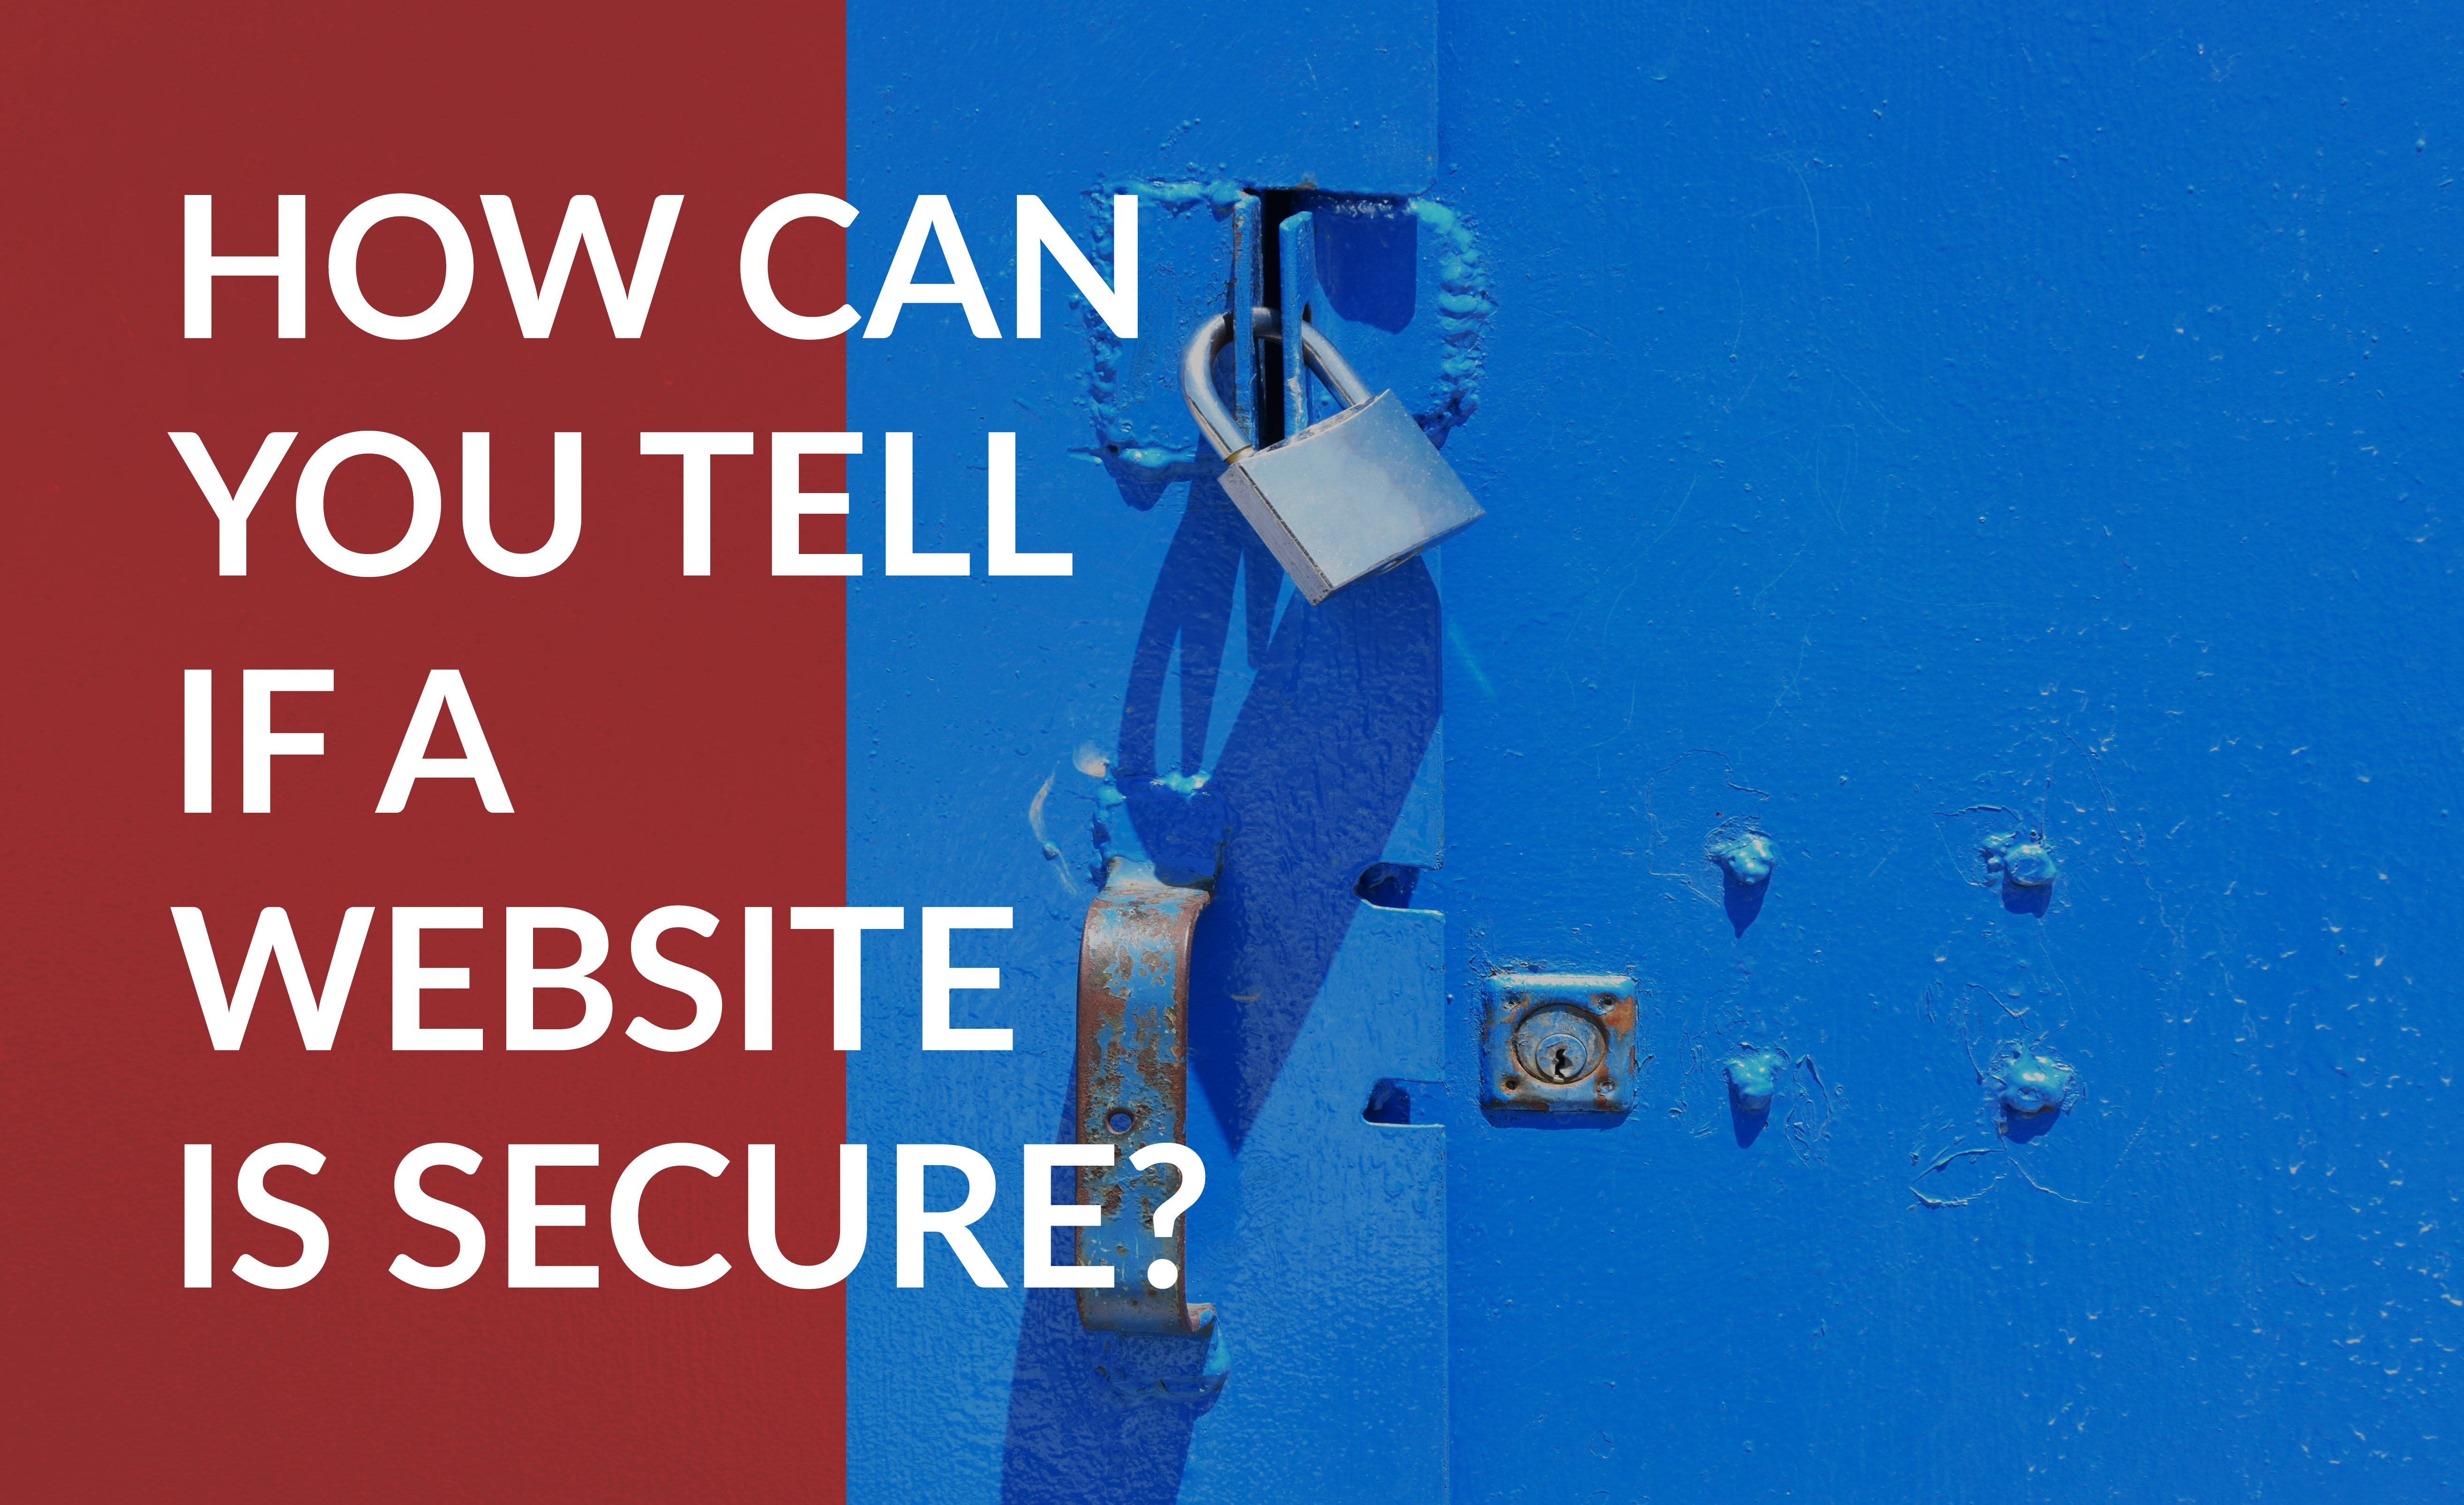 How can you tell if a website is secure?